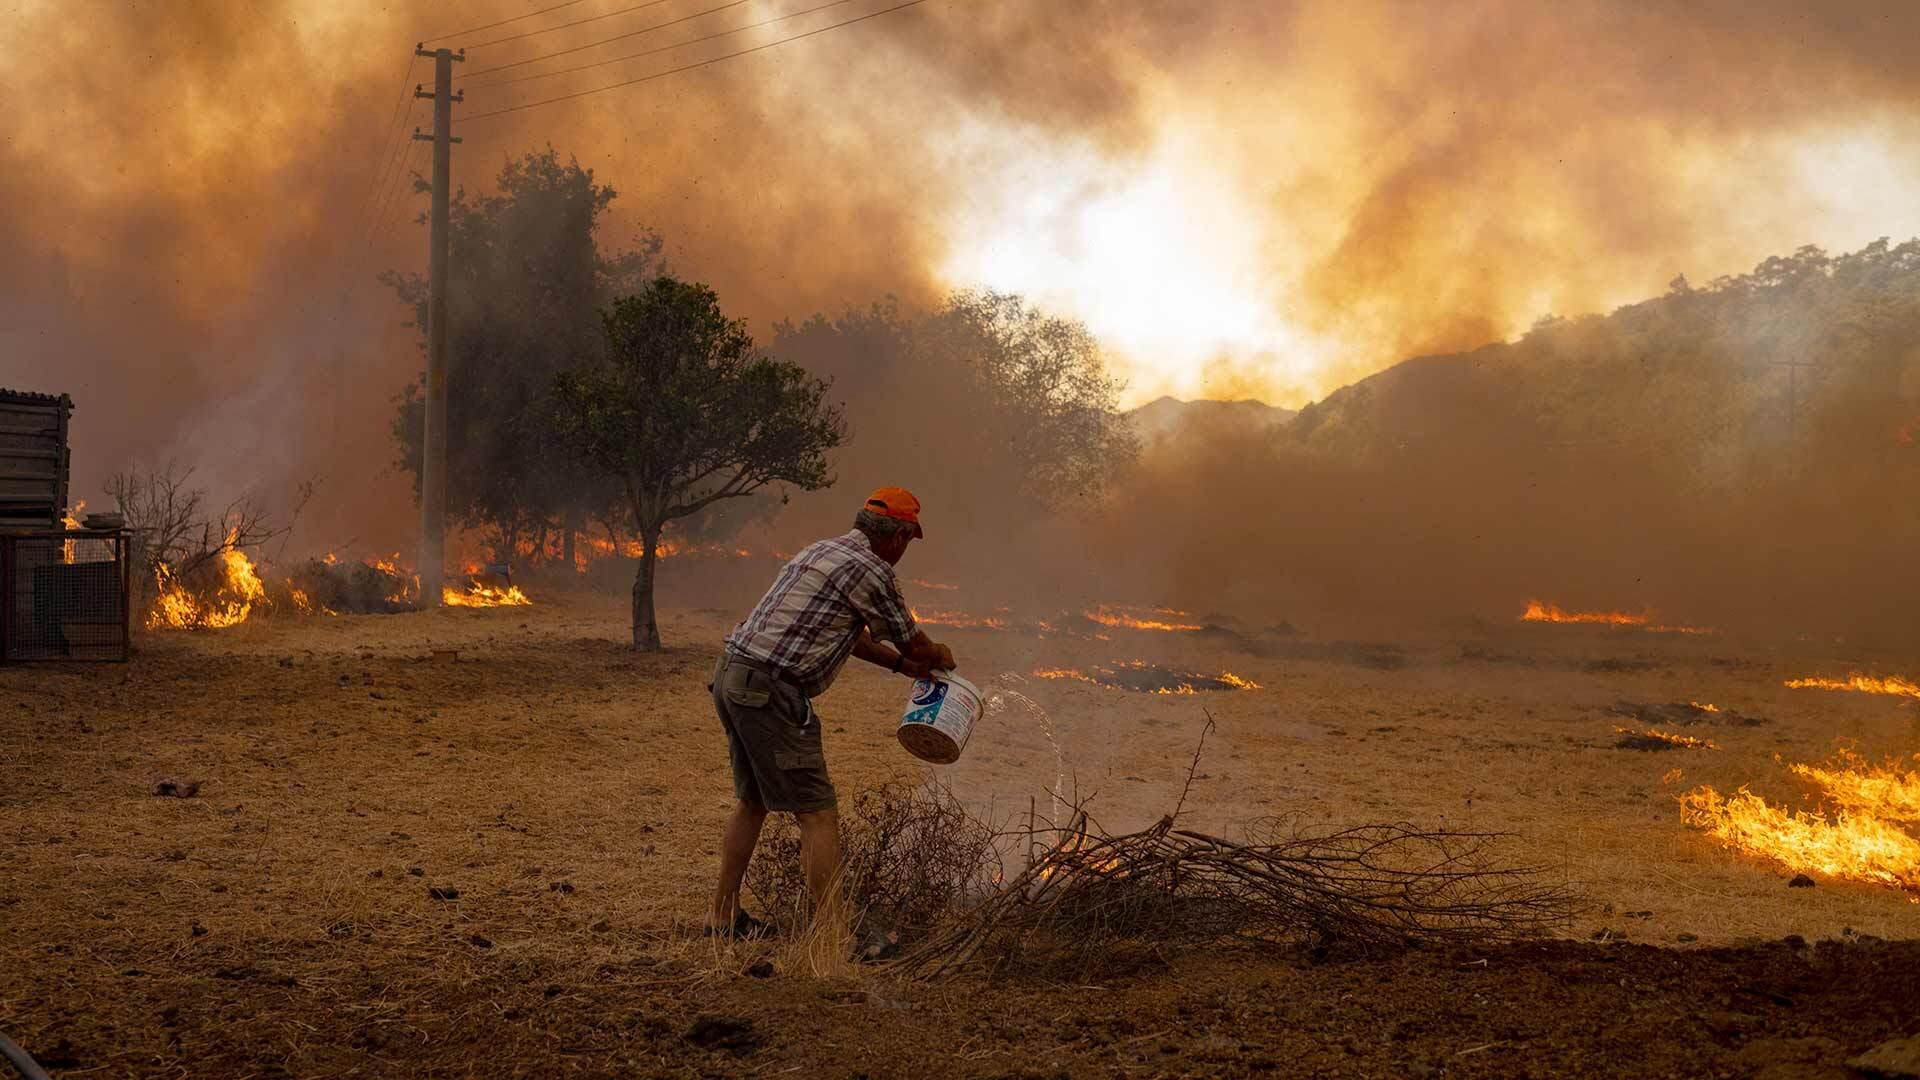 A man in rural Turkey tries to fight a wildfire in August 2021